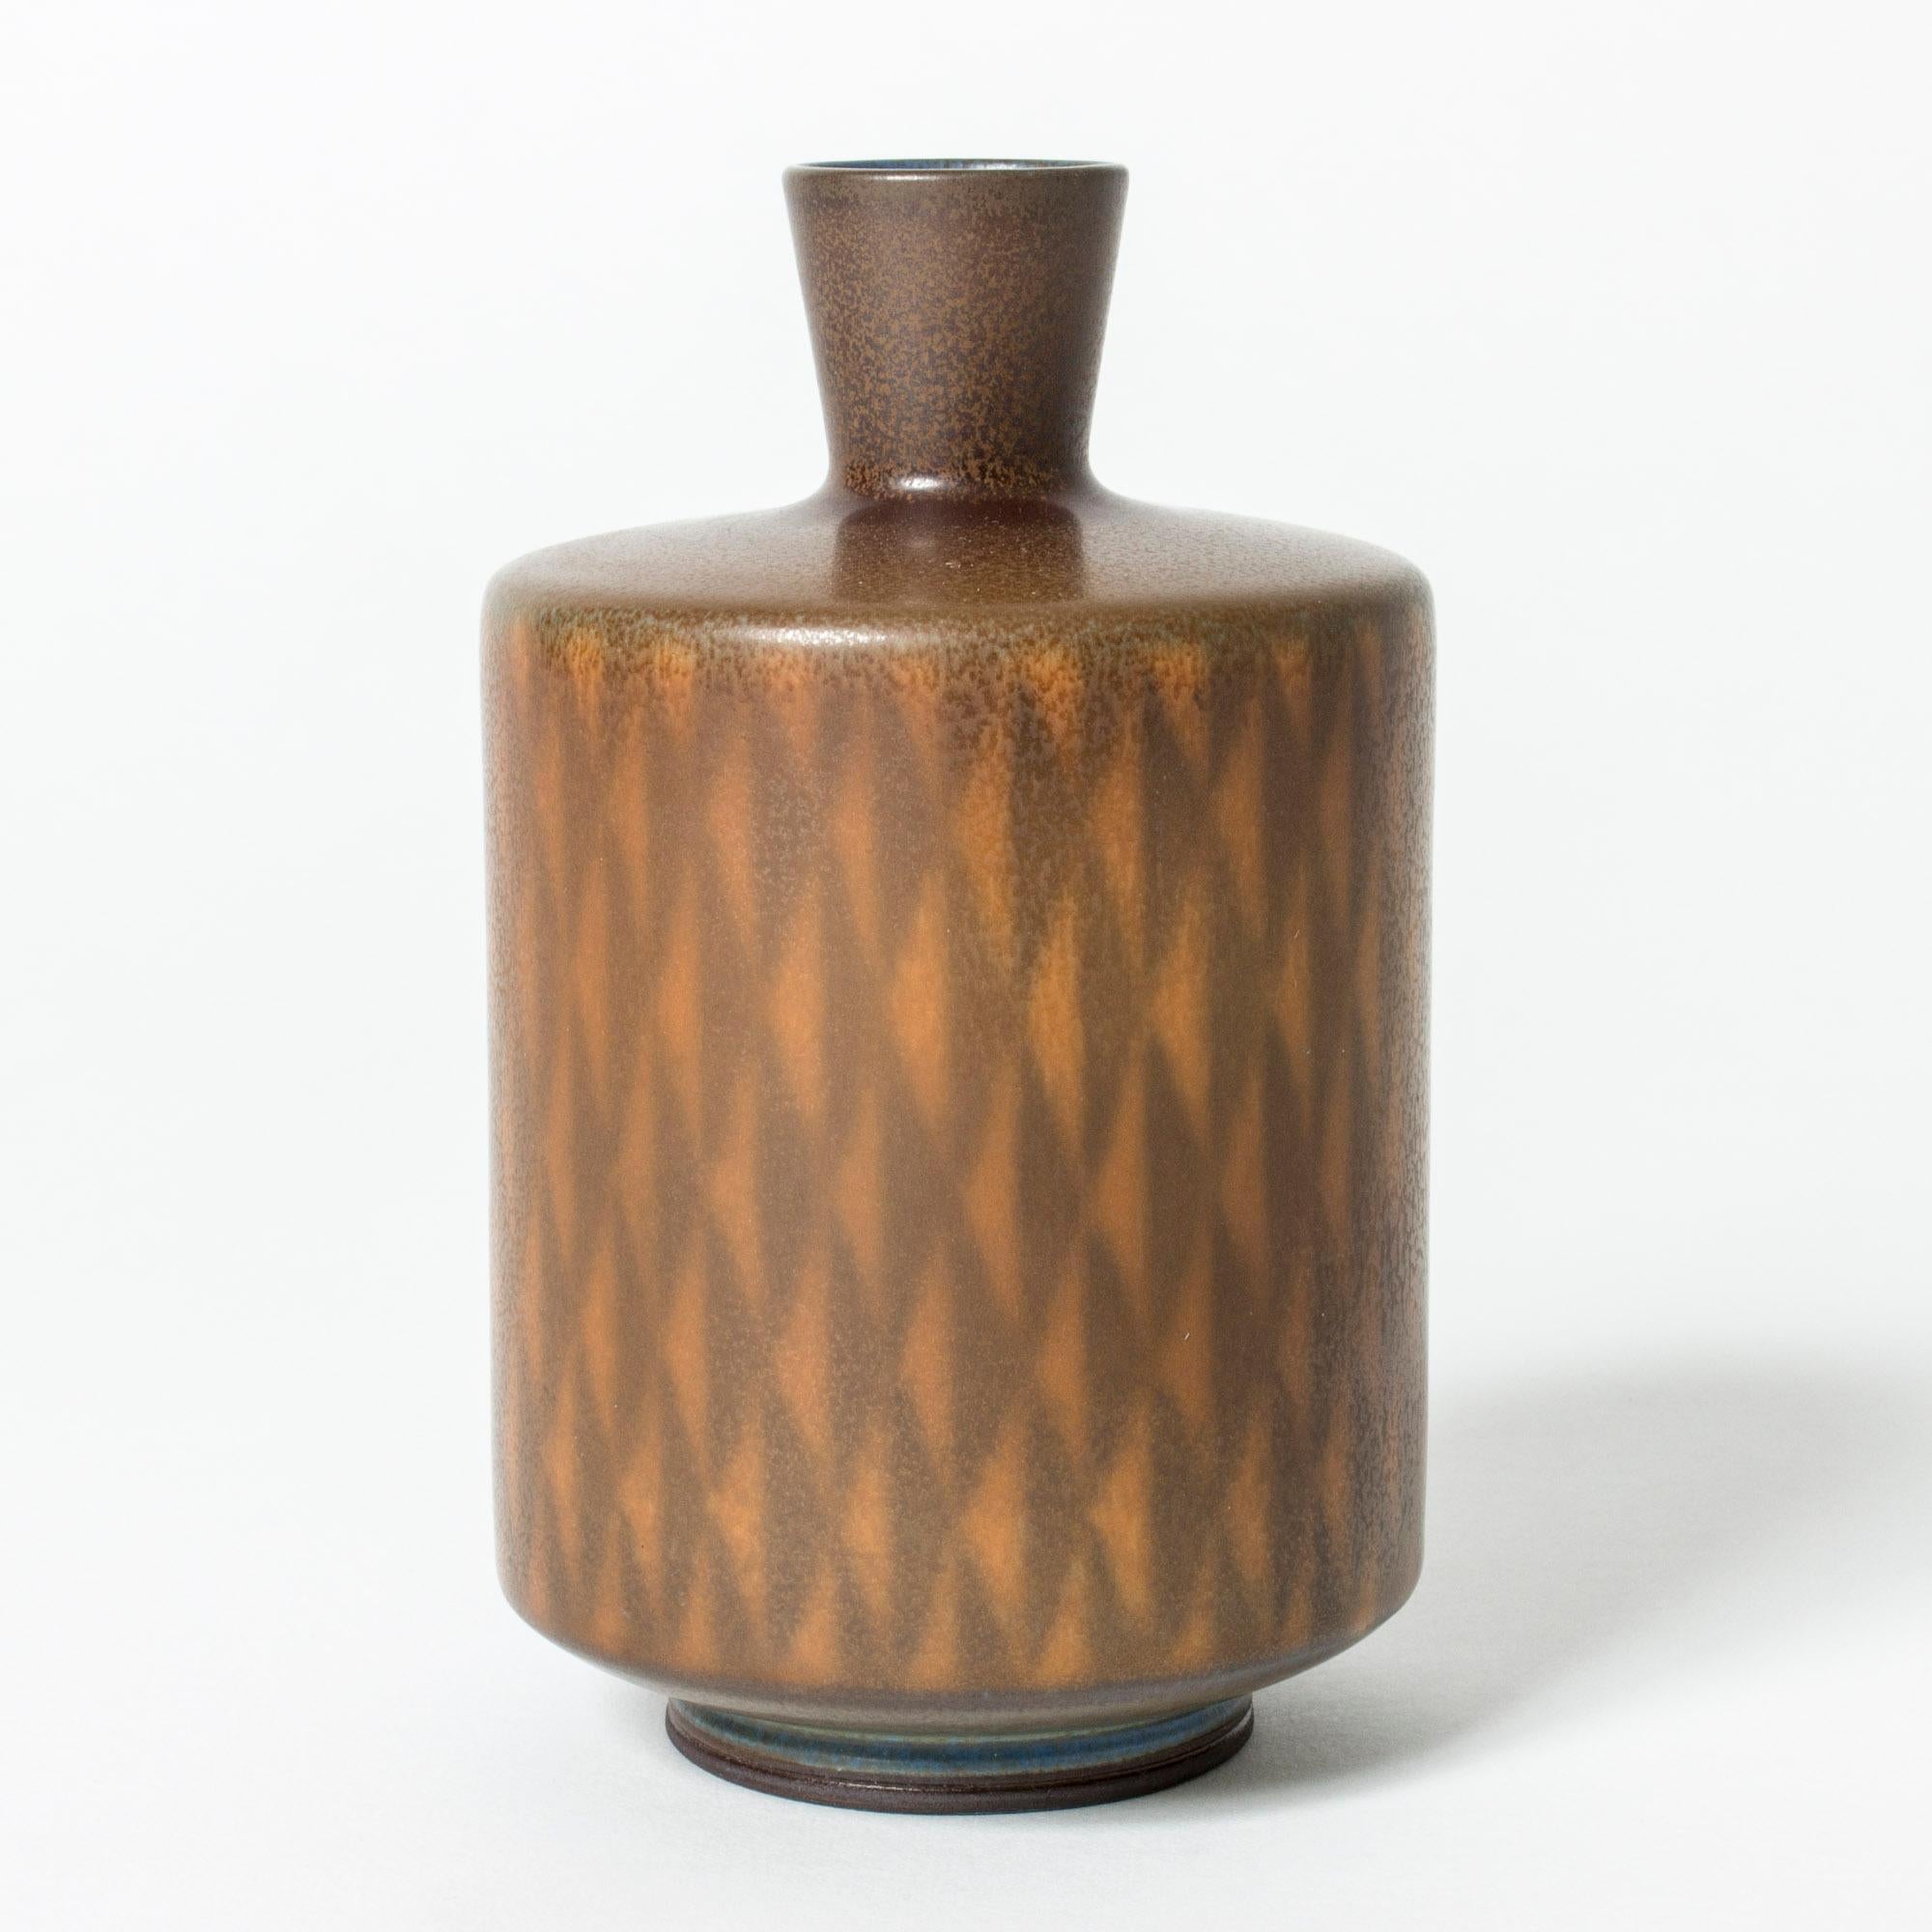 Cool stoneware vase by Berndt Friberg, in a cylinder form. Rare graphic decor in nuances of brown. Contrasting blue glaze around the base.

Berndt Friberg was a Swedish ceramicist, renowned for his stoneware vases and vessels for Gustavsberg. His